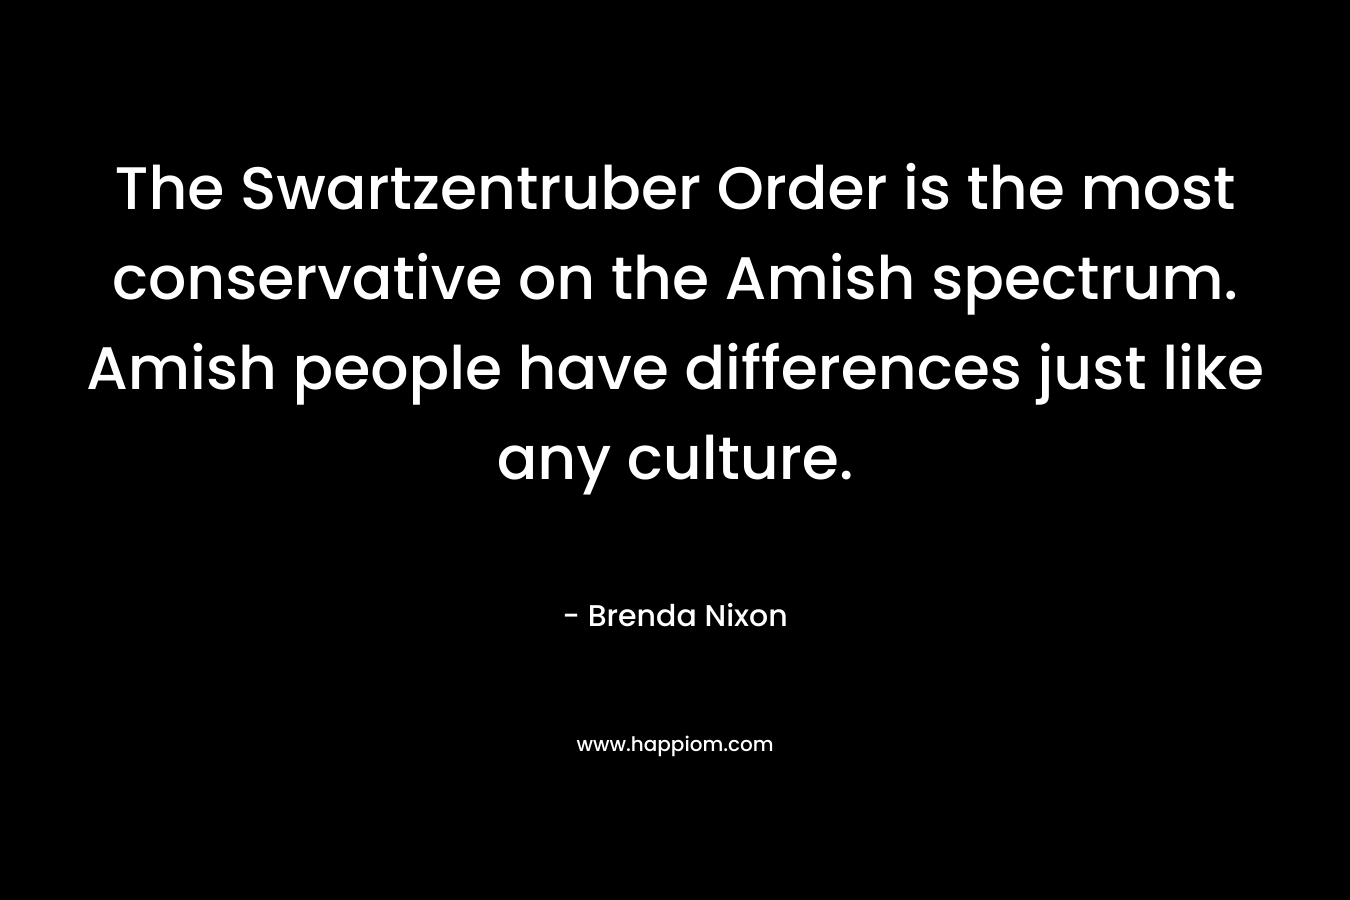 The Swartzentruber Order is the most conservative on the Amish spectrum. Amish people have differences just like any culture. – Brenda Nixon